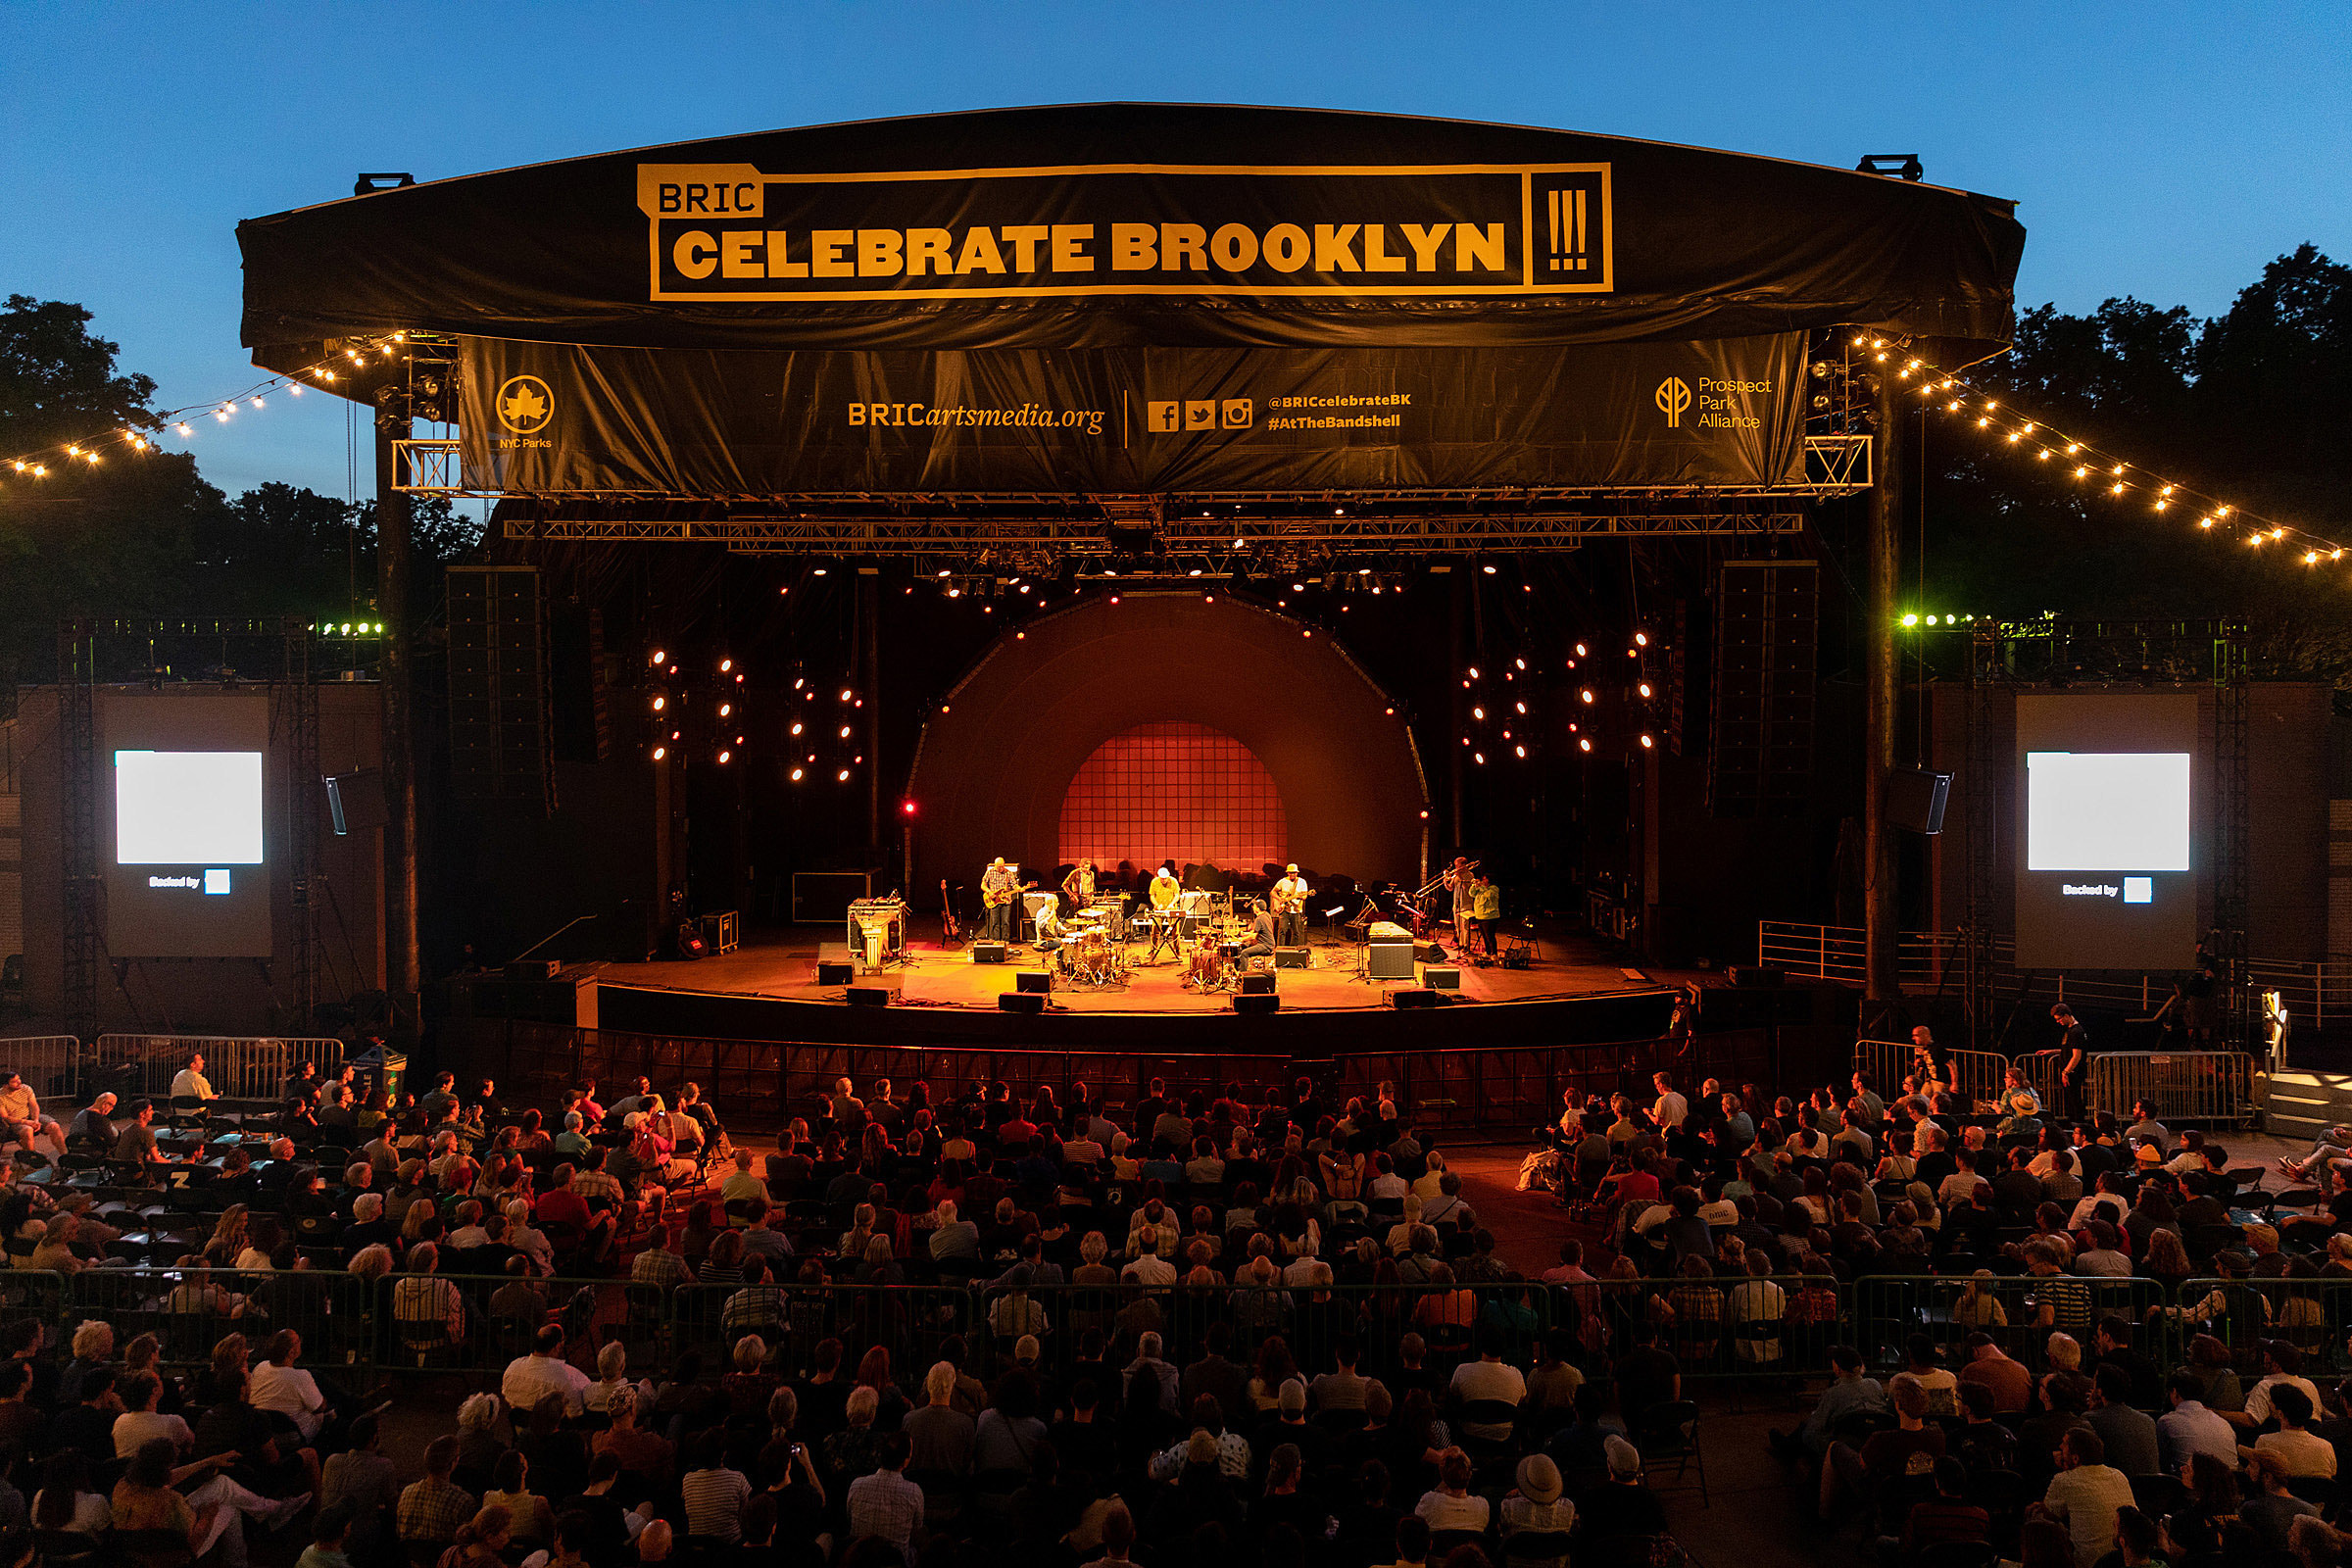 BRIC Celebrate Brooklyn! Festival lifts capacity restrictions, won't